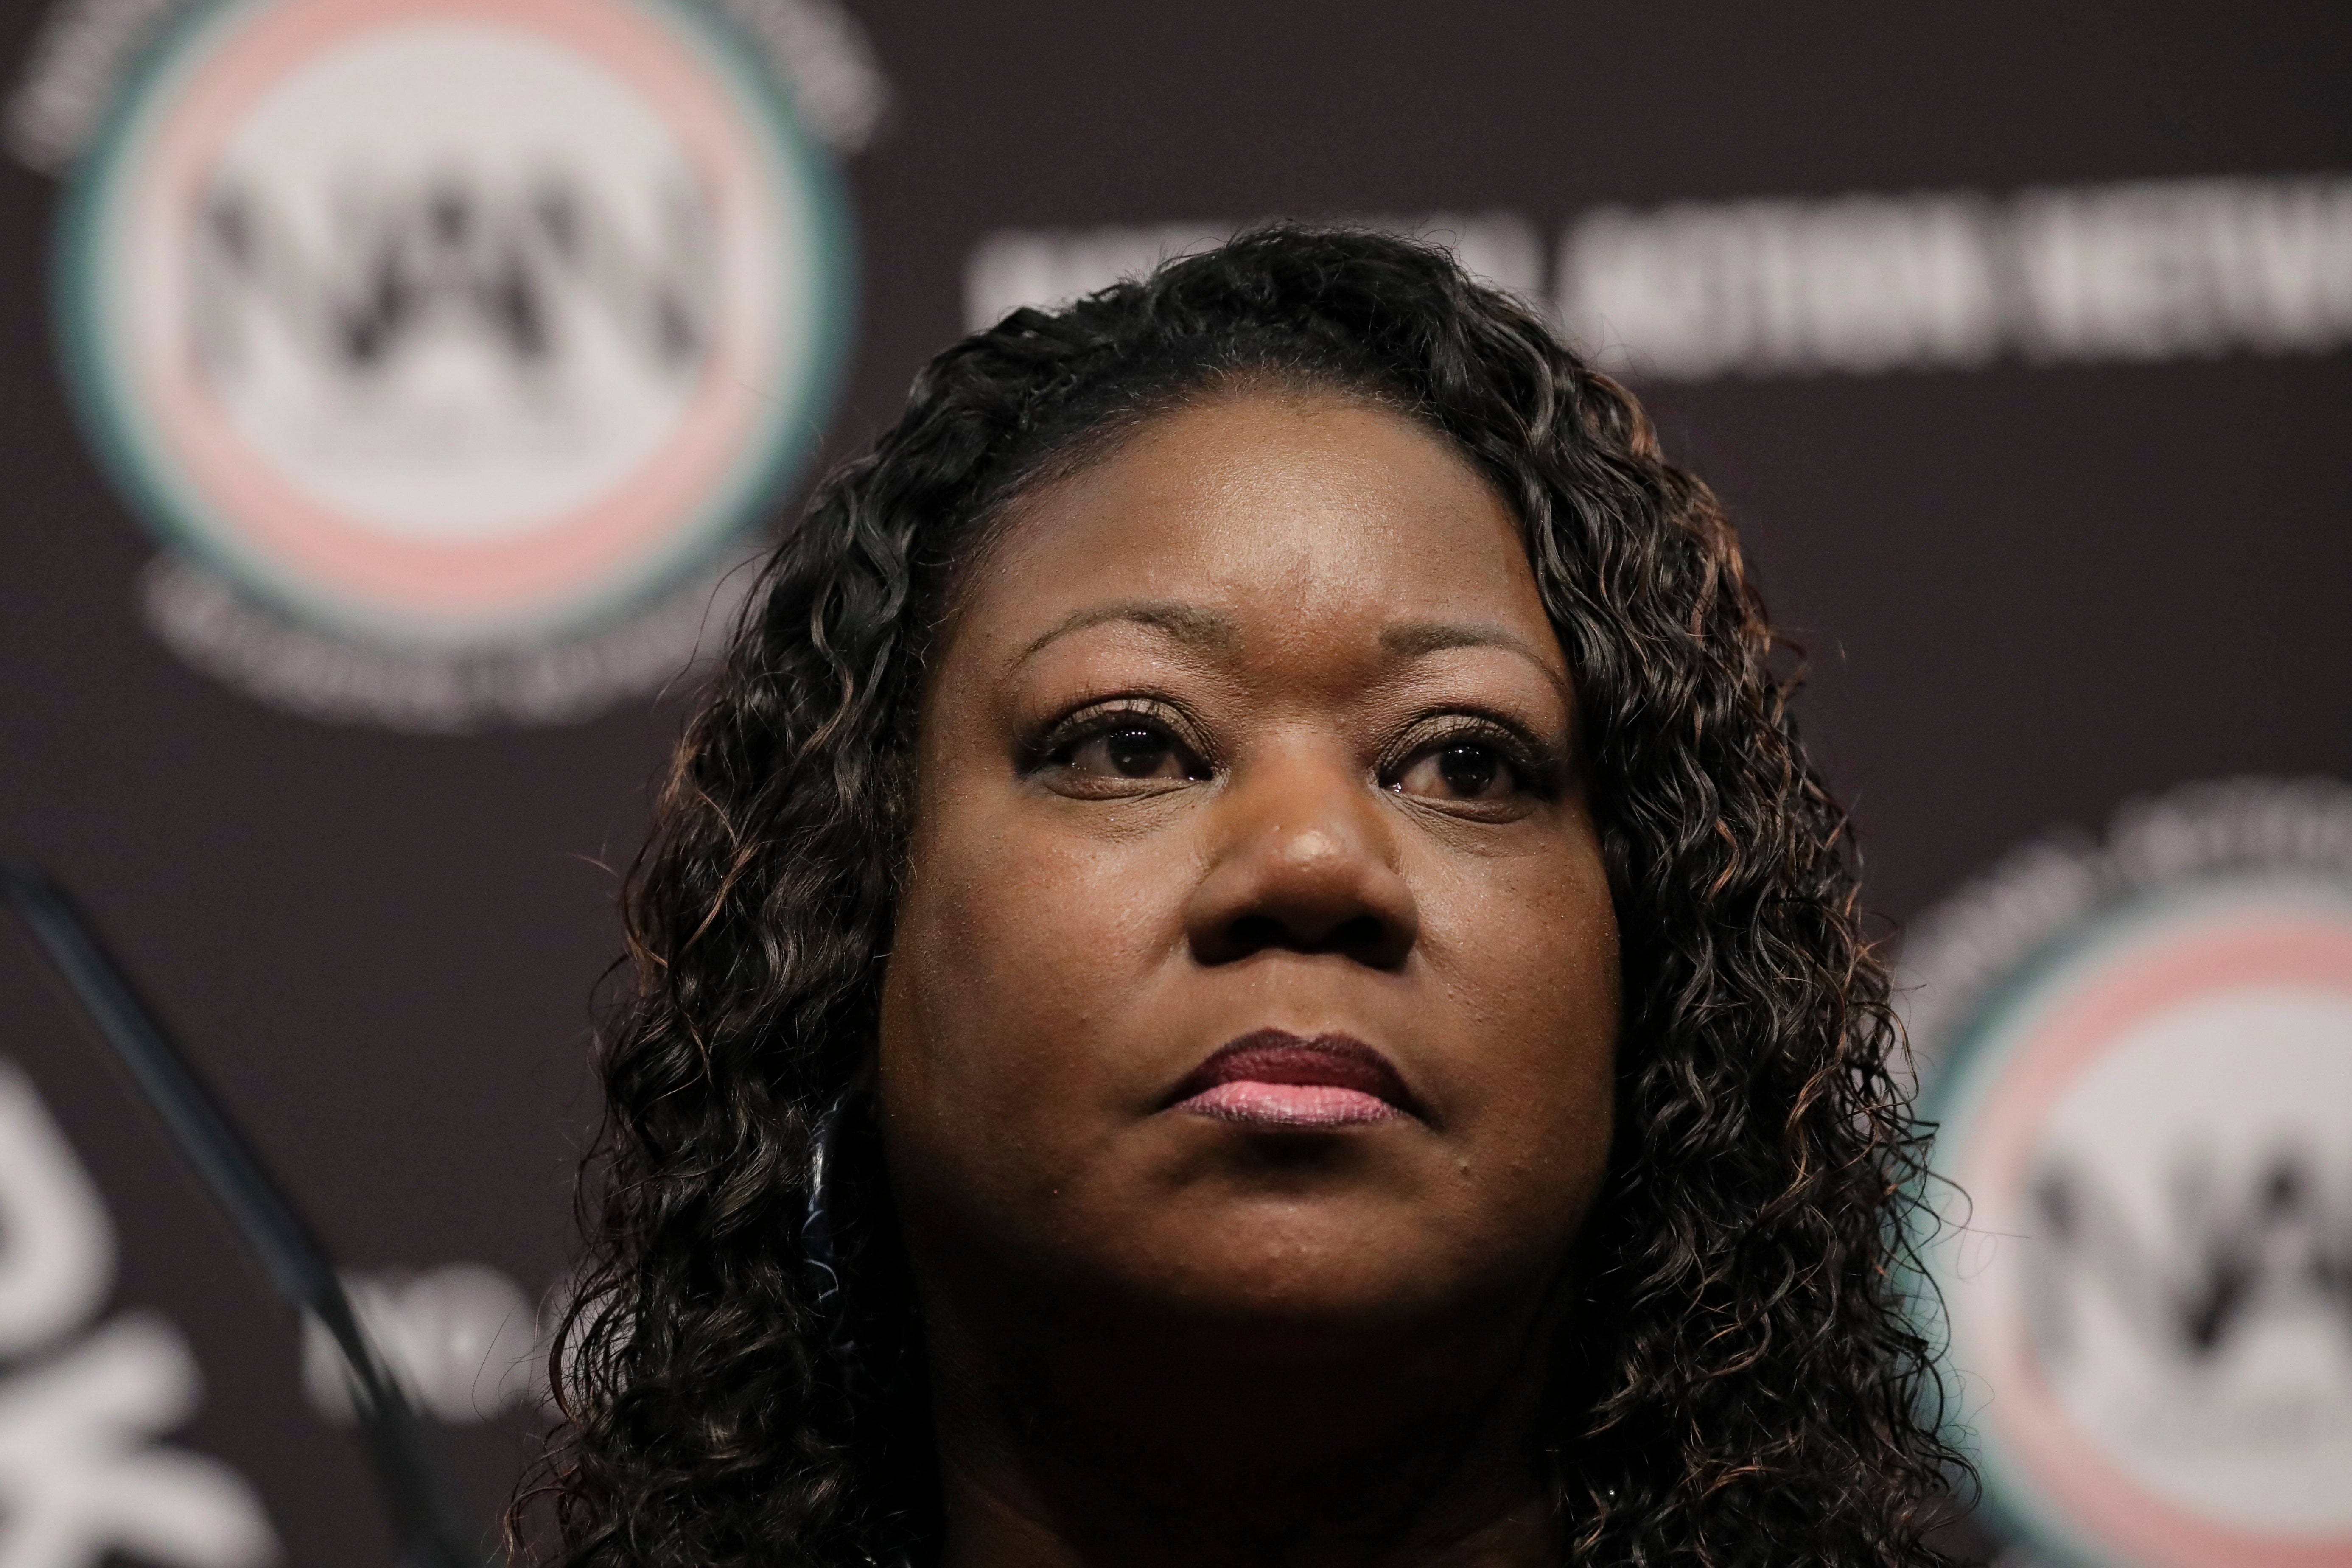 Trayvon Martin’s mother Sybrina Fulton tells people she does not want to be strong but has no choice